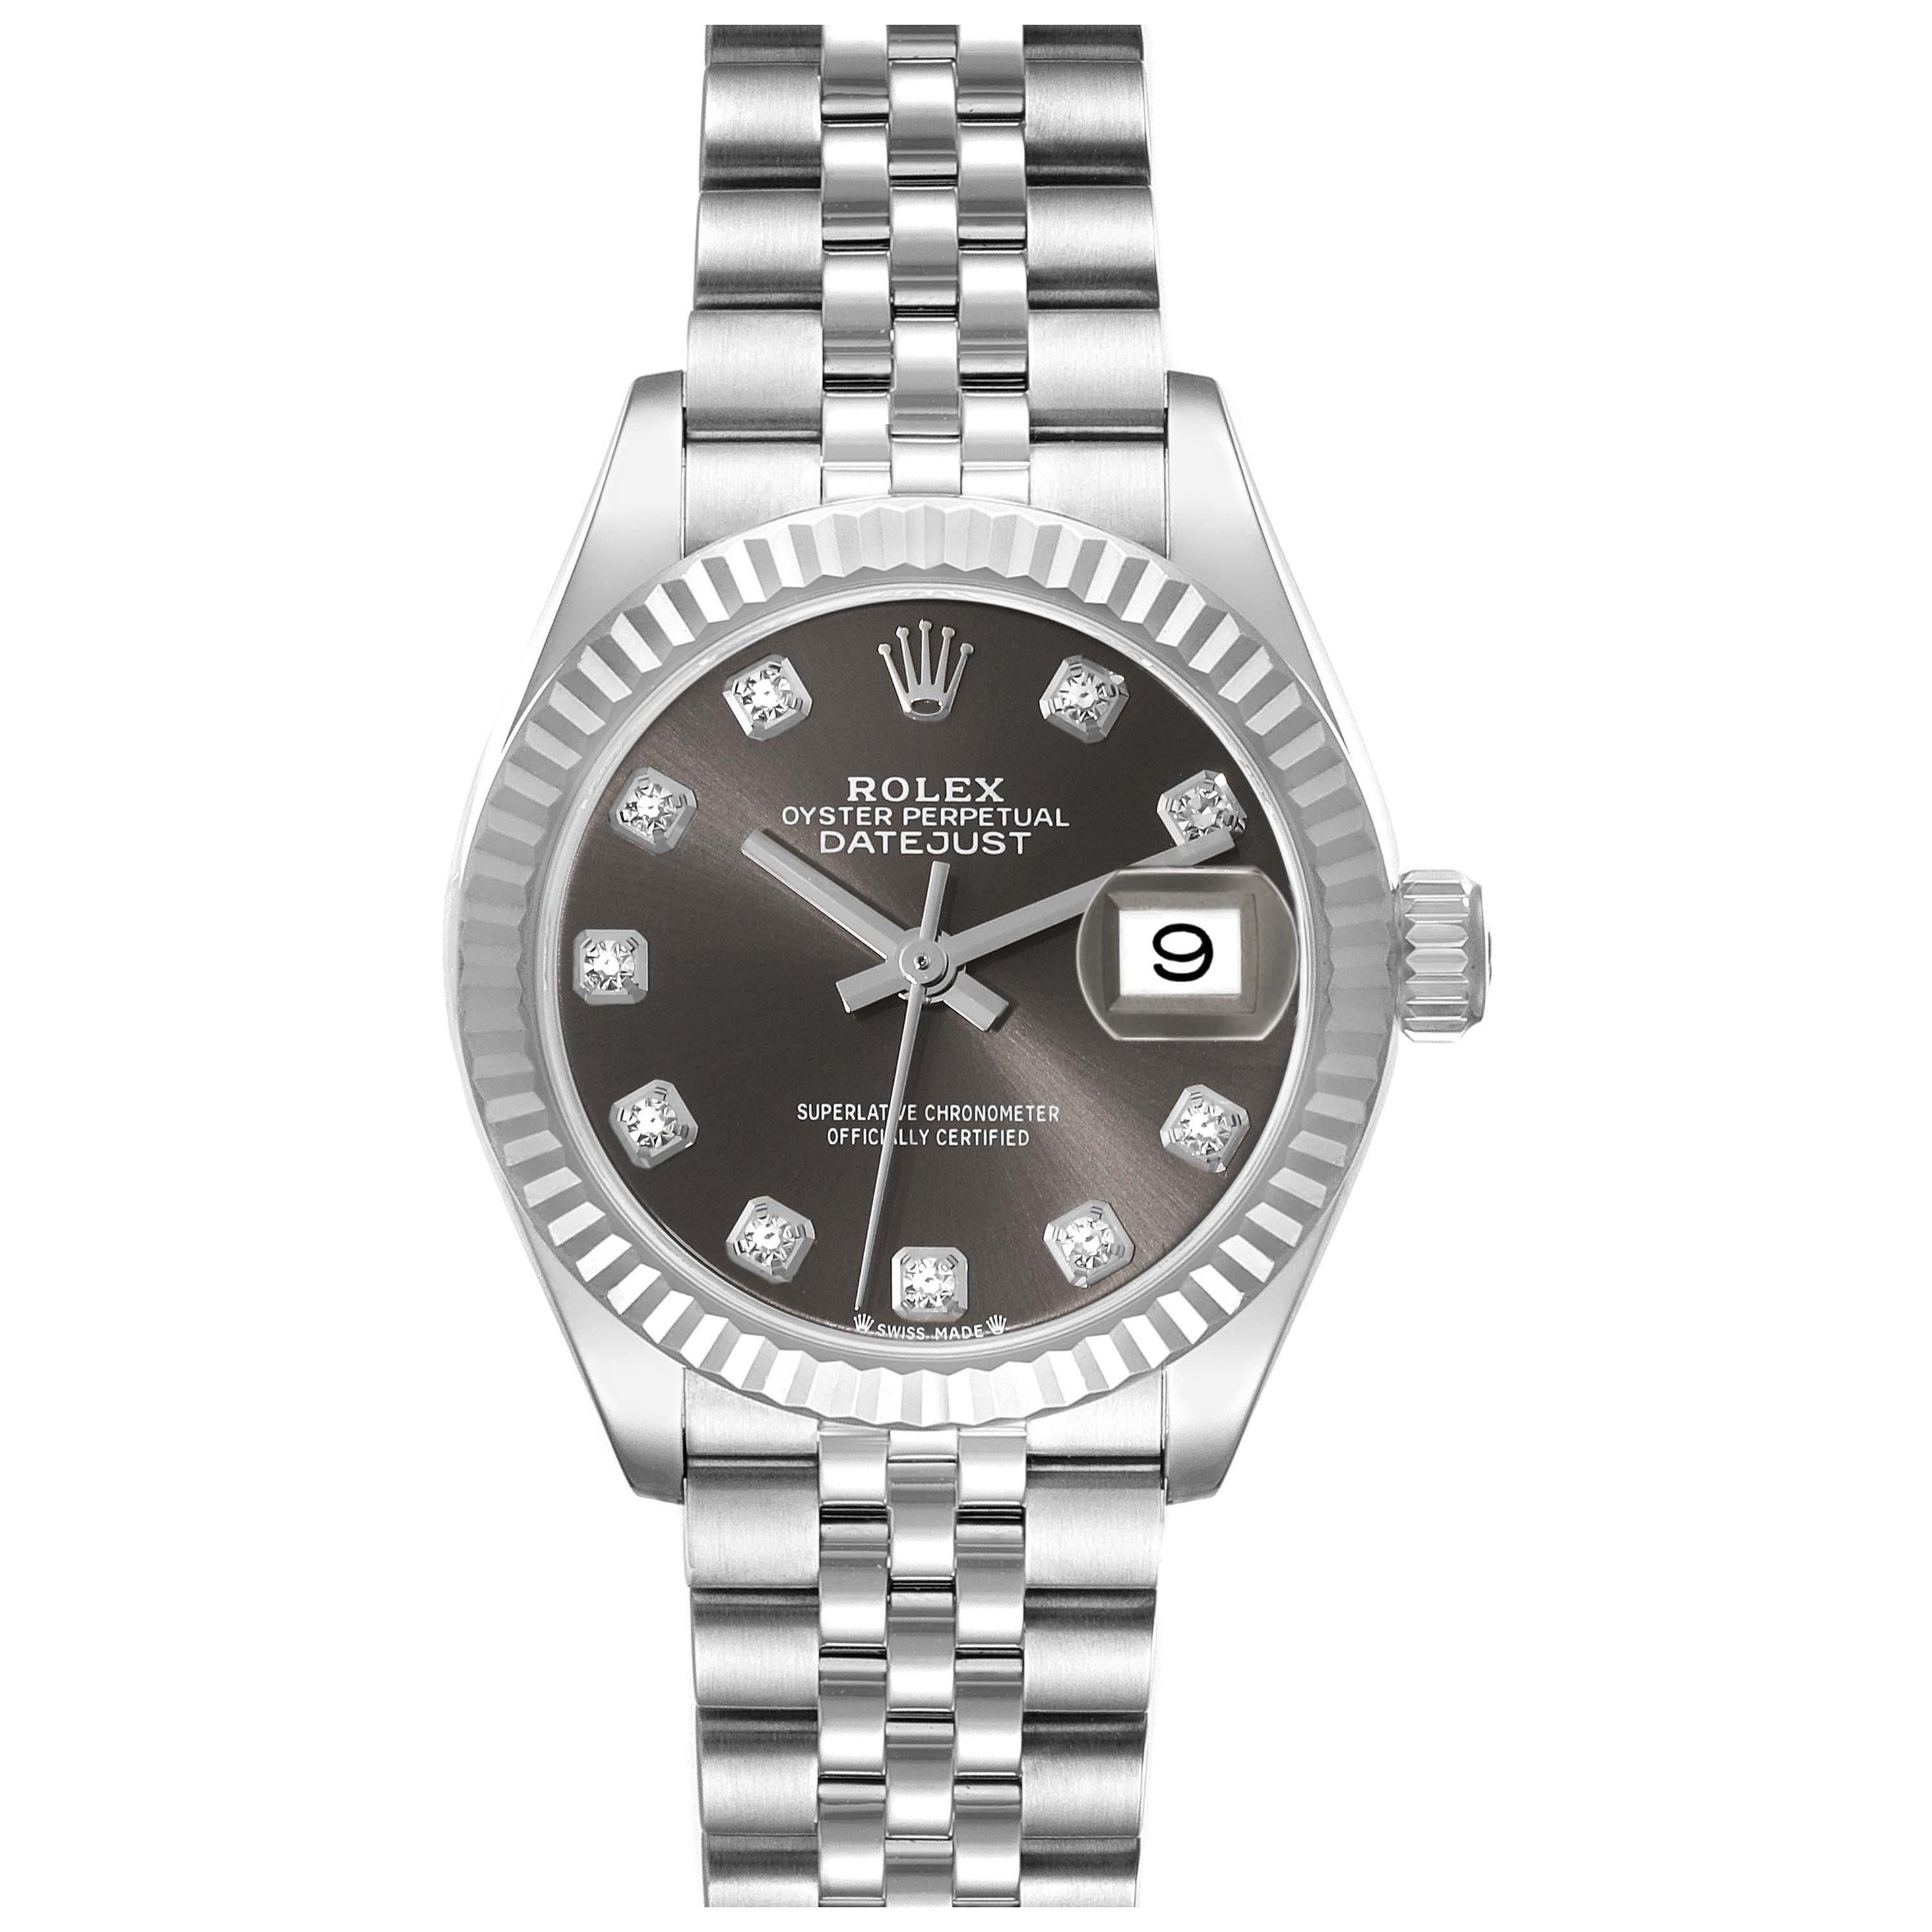 Rolex Datejust 28 Steel White Gold Diamond Dial Ladies Watch 279174 Box Card For Sale